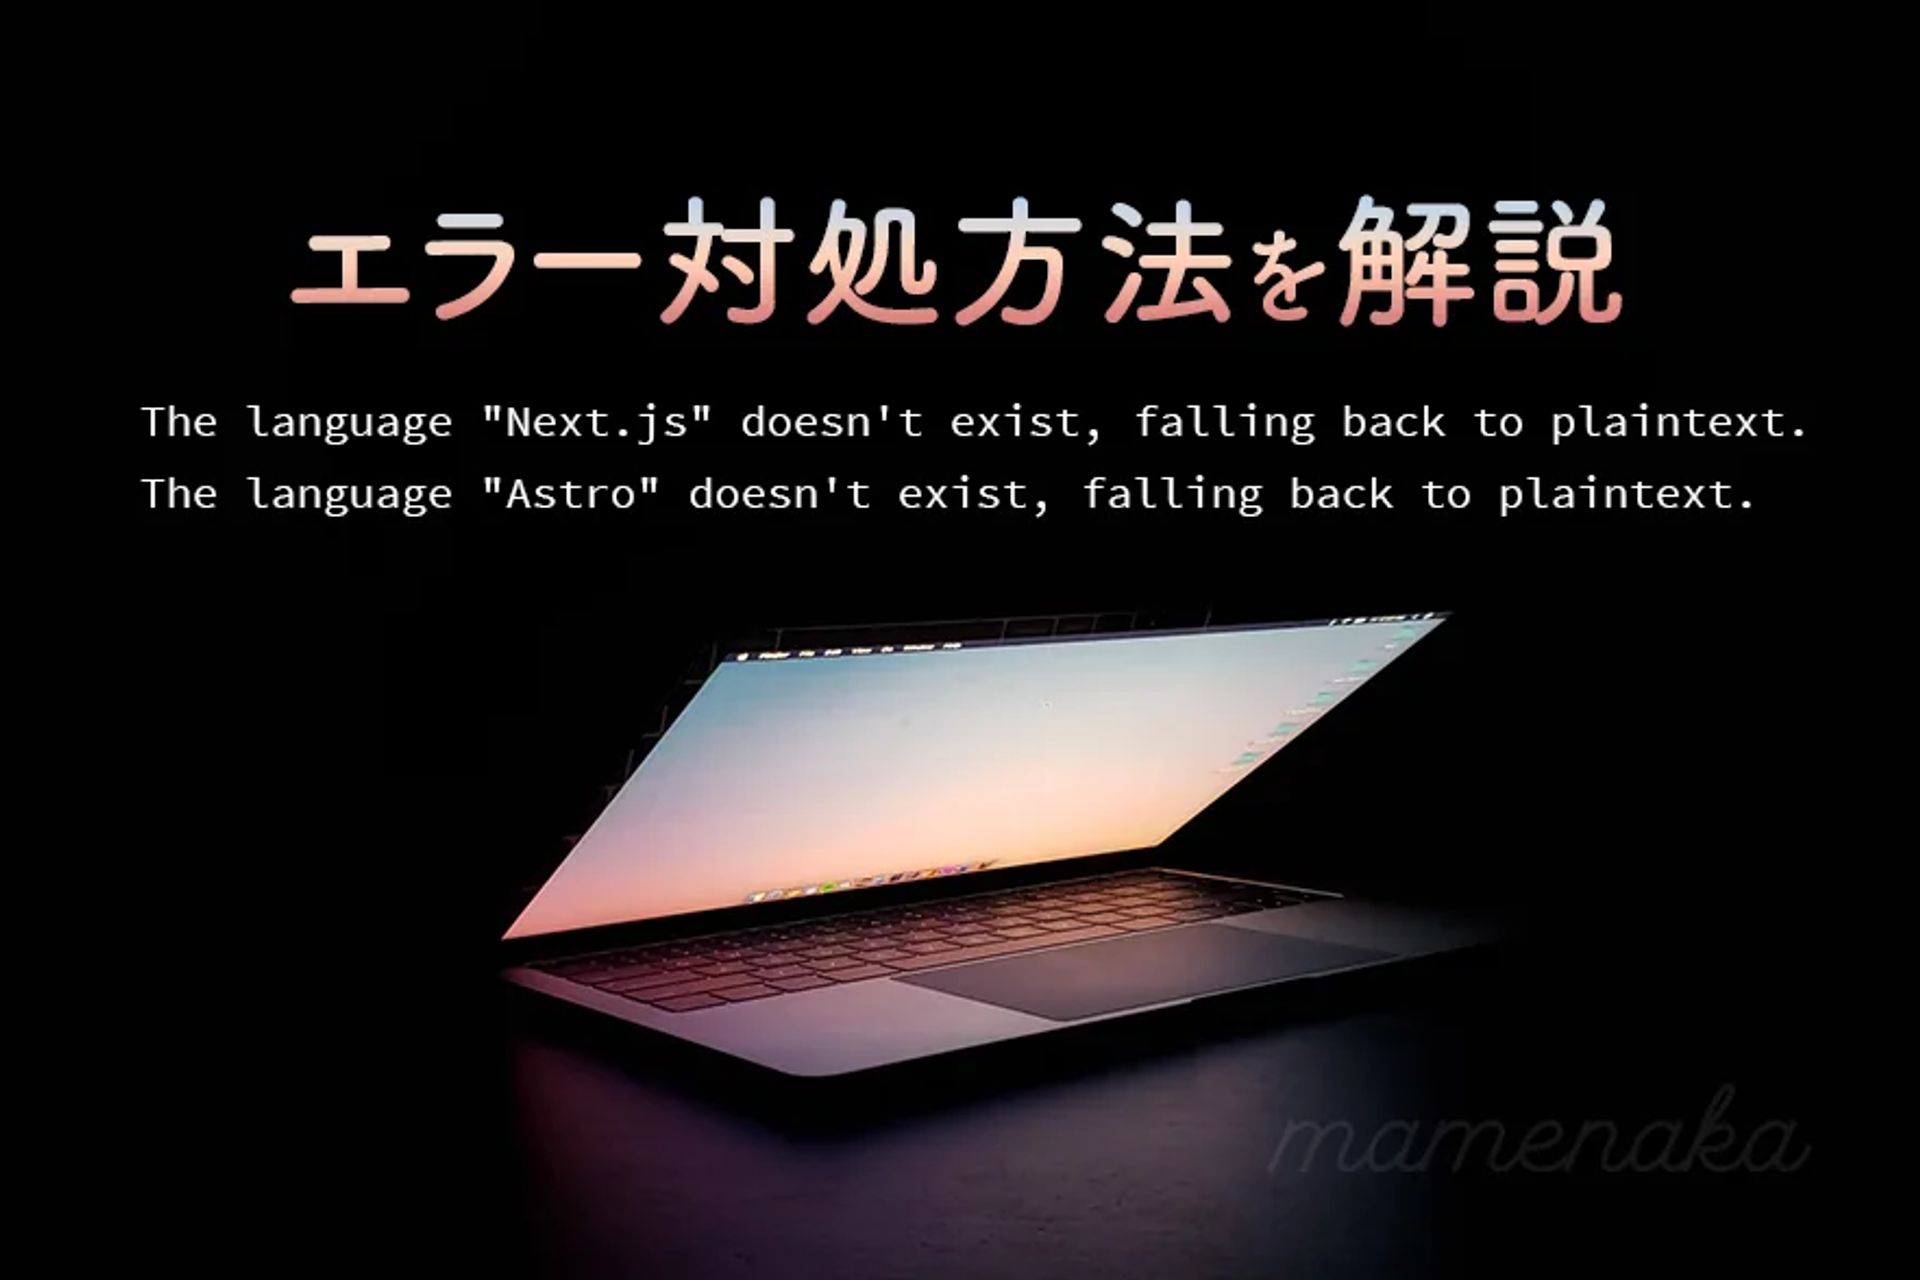 The language "*" doesn't exist, falling back to plaintext.のエラー対処方法